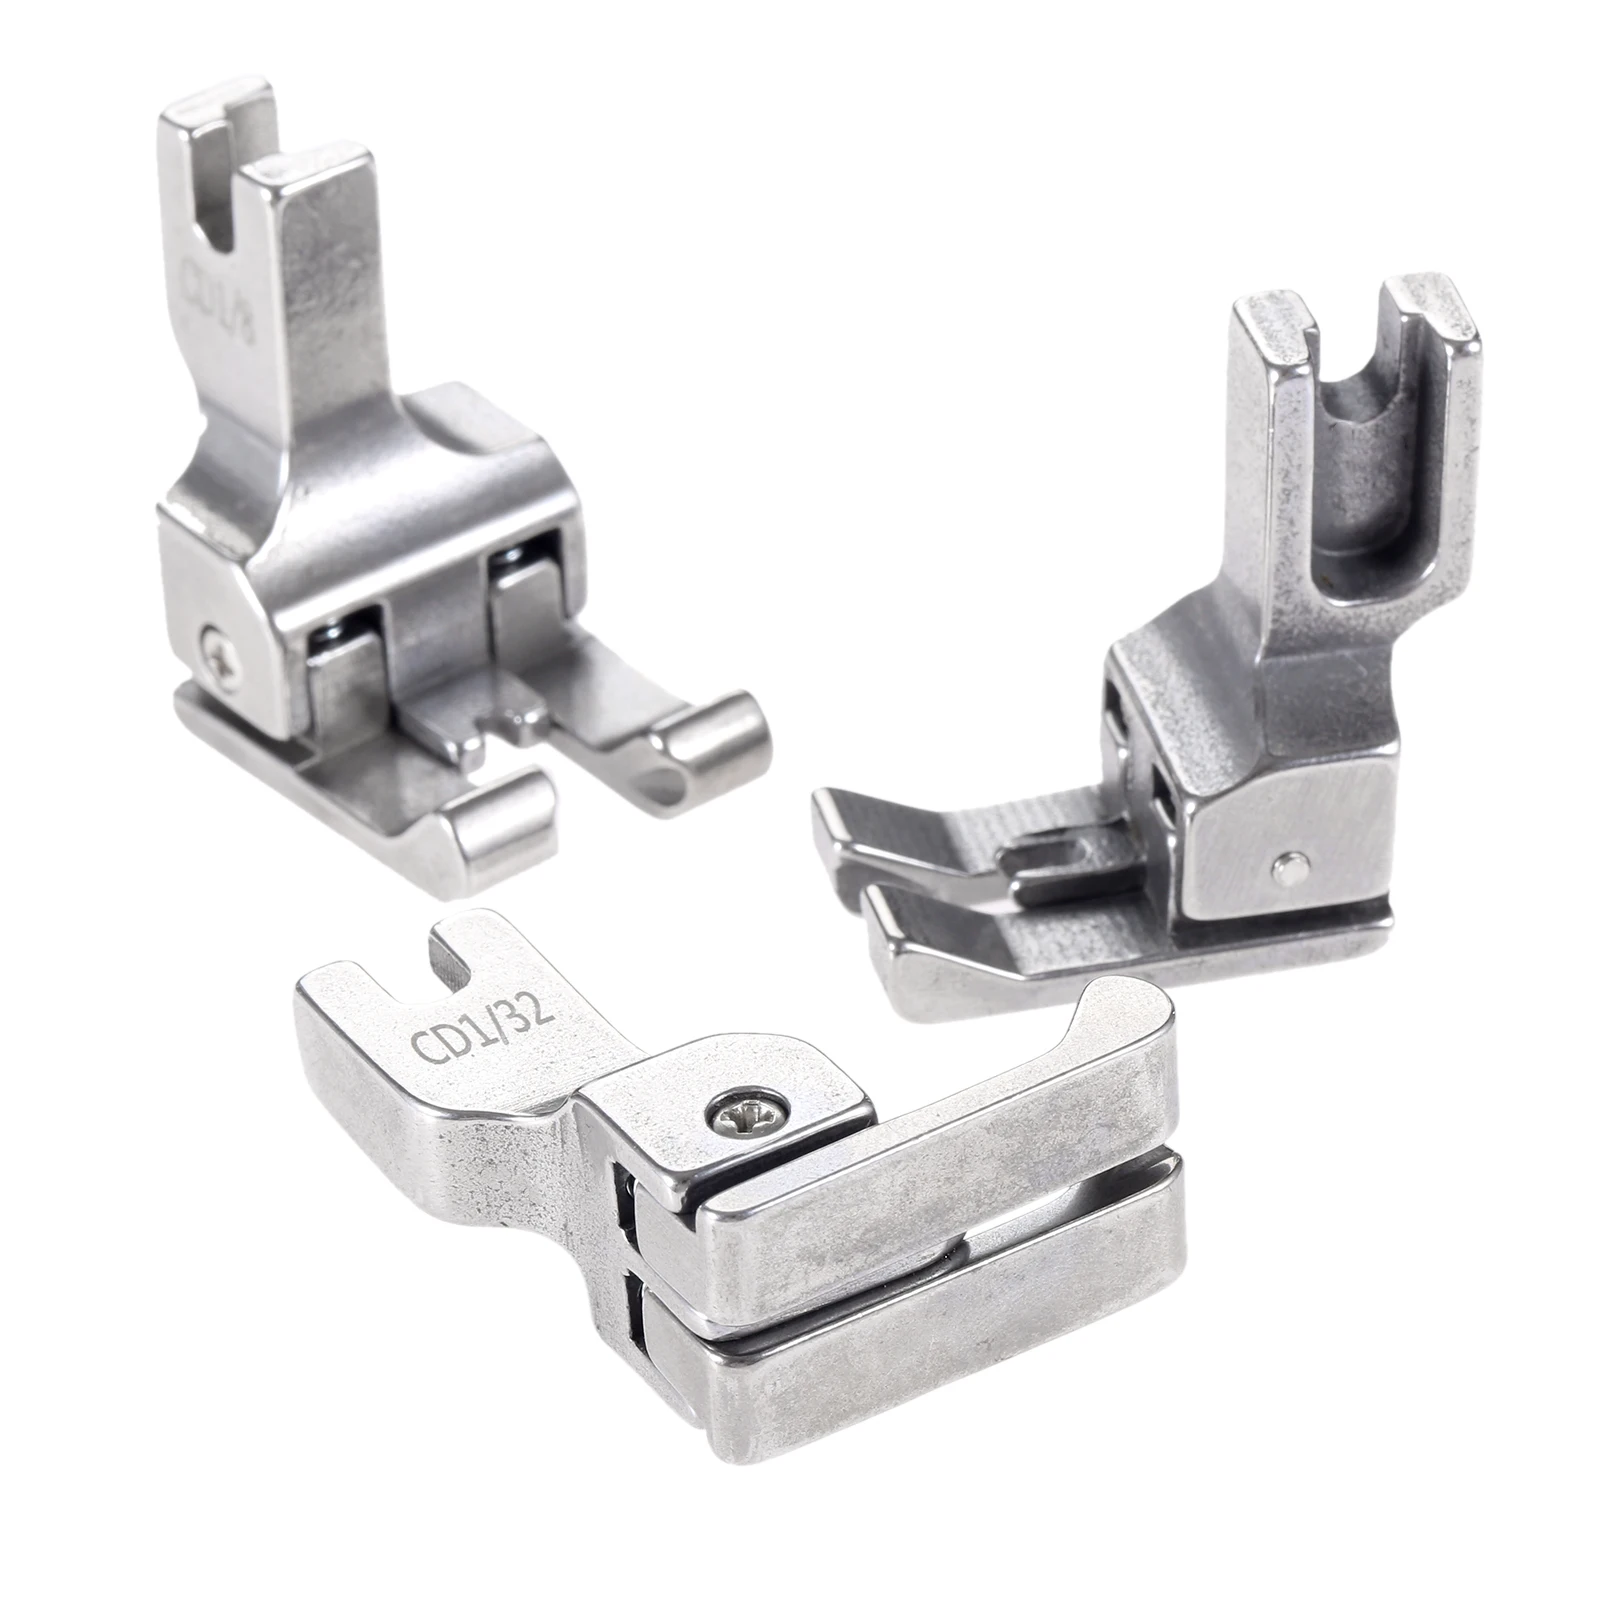 Double Compensating Presser Foot Industrial Sewing Machine Steel Right&Left top stitching CD1/32 CD1/16 CD1/8 CD3/16 Hicello images - 6